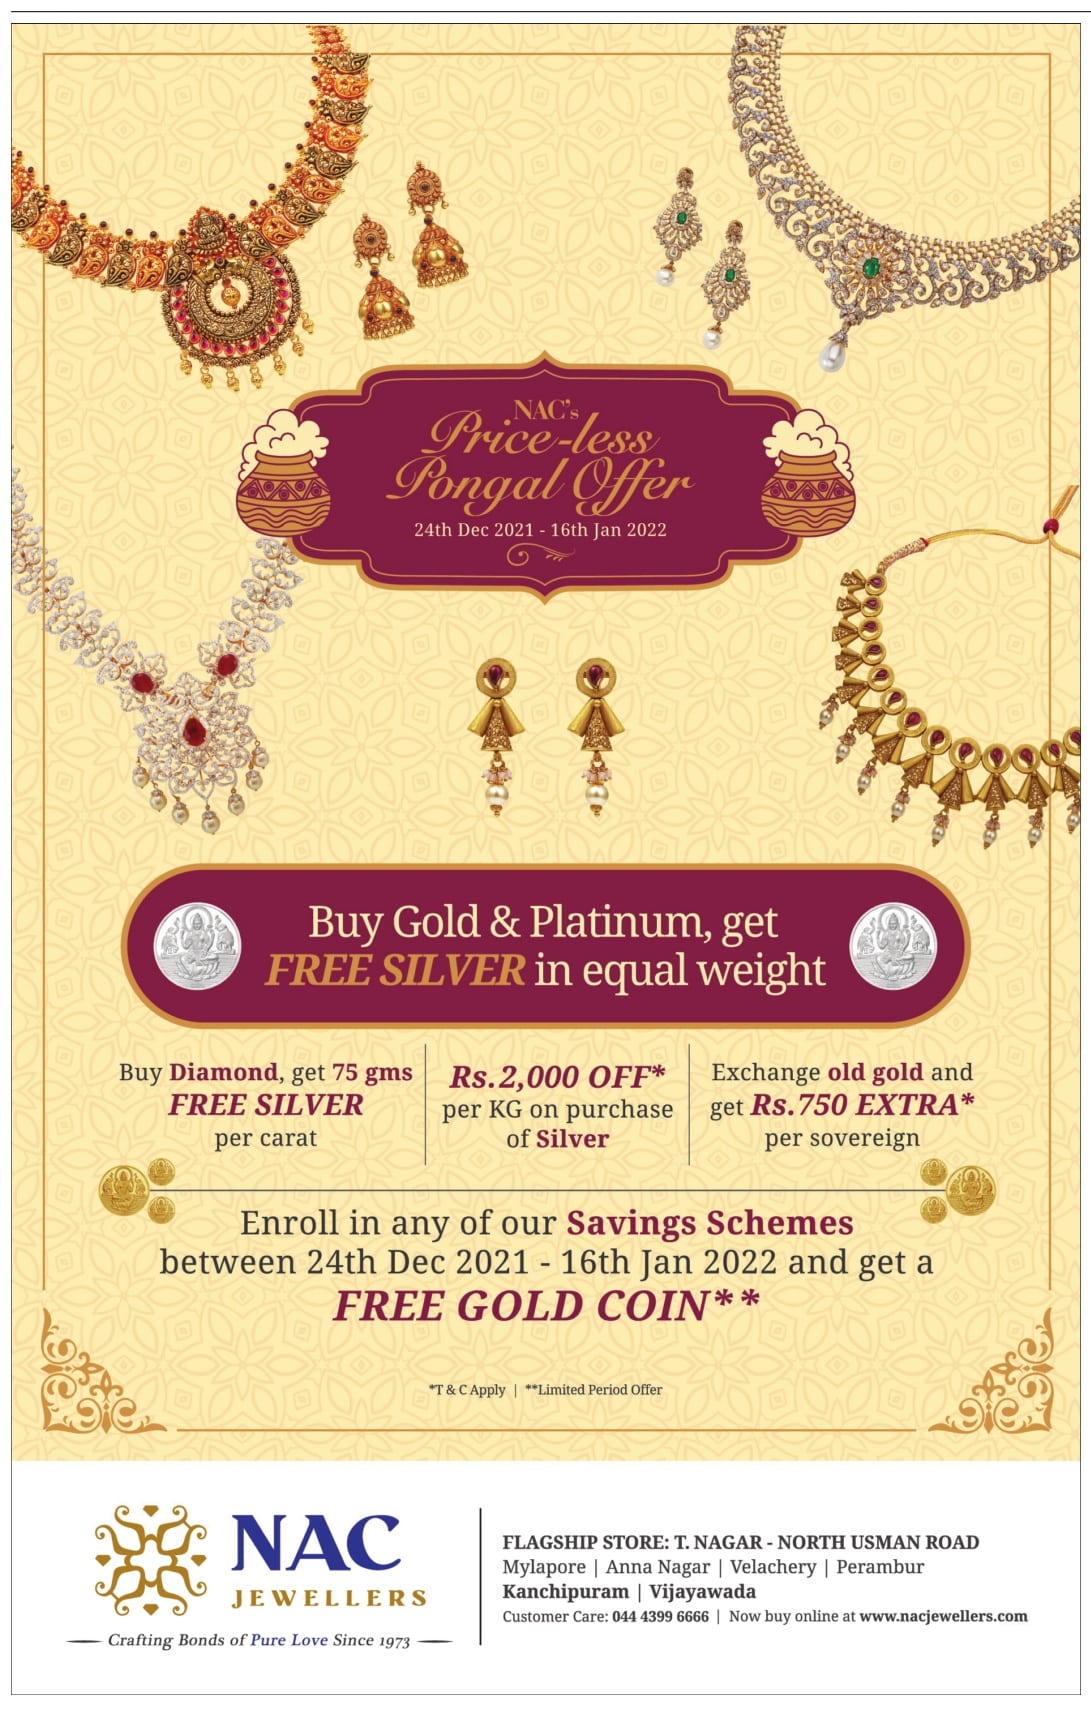 NAC Jewellers Pongal Offer